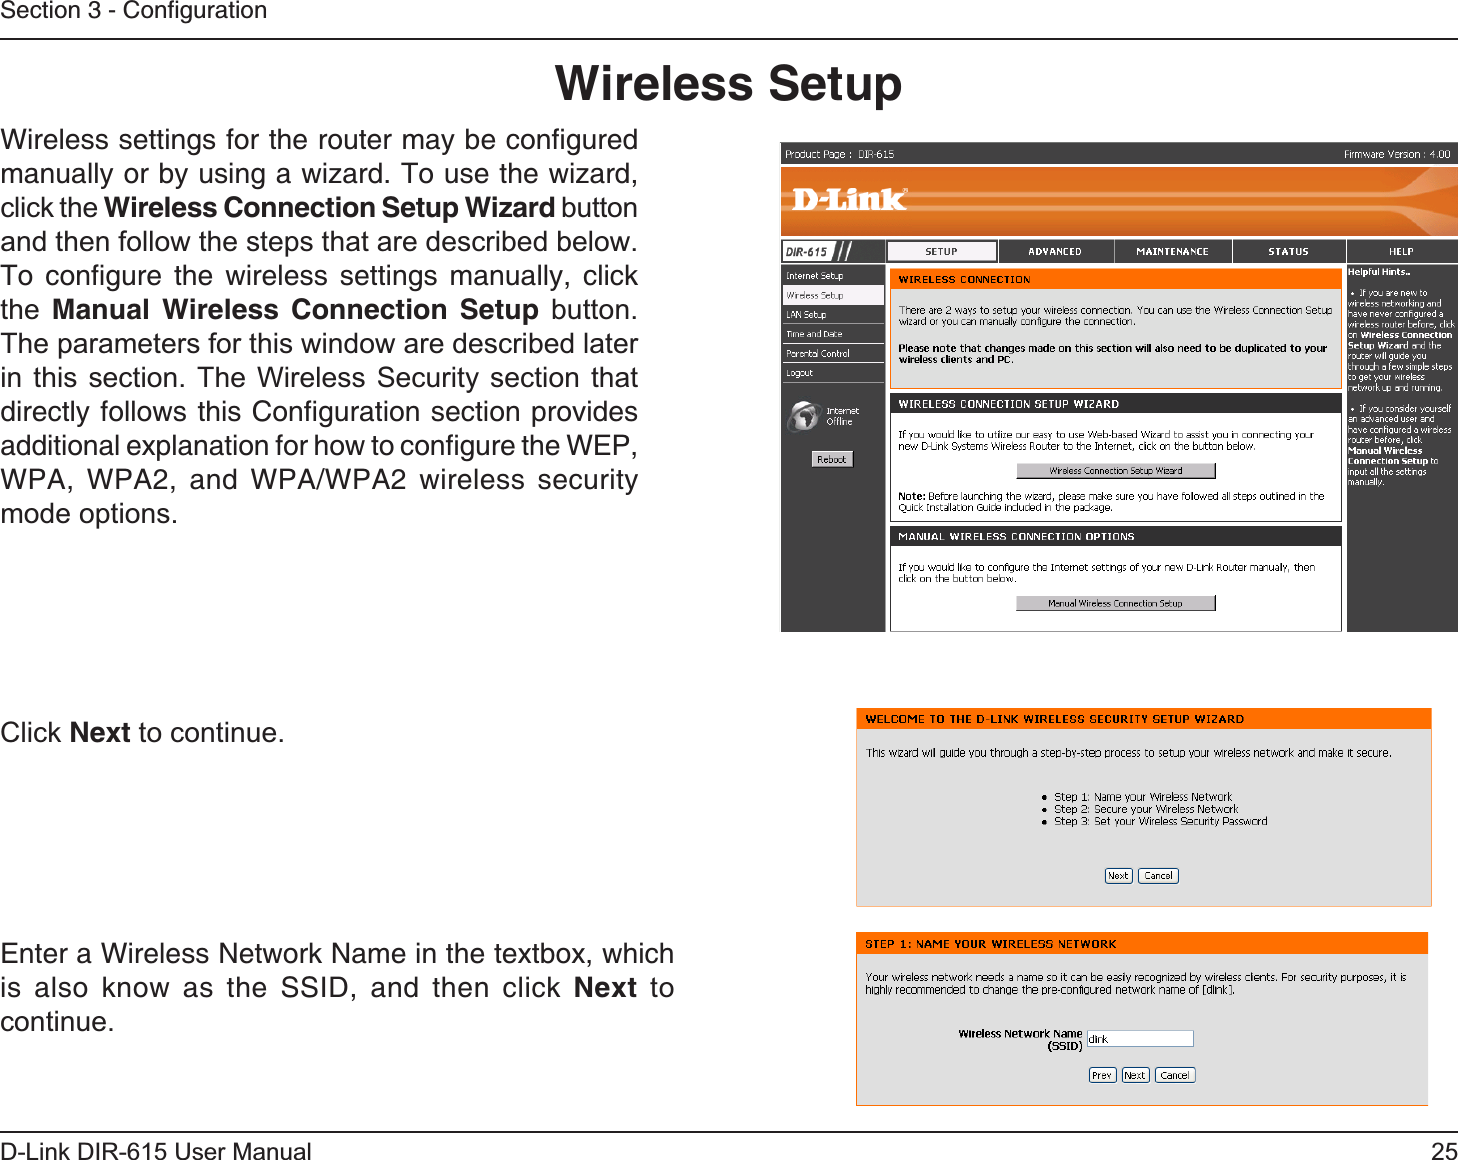 25D-Link DIR-615 User ManualSection 3 - ConﬁgurationWireless SetupWireless settings for the router may be conﬁgured manually or by using a wizard. To use the wizard, click the Wireless Connection Setup Wizard button and then follow the steps that are described below. To conﬁgure the wireless settings manually, click the Manual Wireless Connection Setup button. The parameters for this window are described later in this section. The Wireless Security section that directly follows this Conﬁguration section provides  additional explanation for how to conﬁgure the WEP, WPA, WPA2, and WPA/WPA2 wireless security mode options. Click Next to continue.Enter a Wireless Network Name in the textbox, which is also know as the SSID, and then click Next to continue.